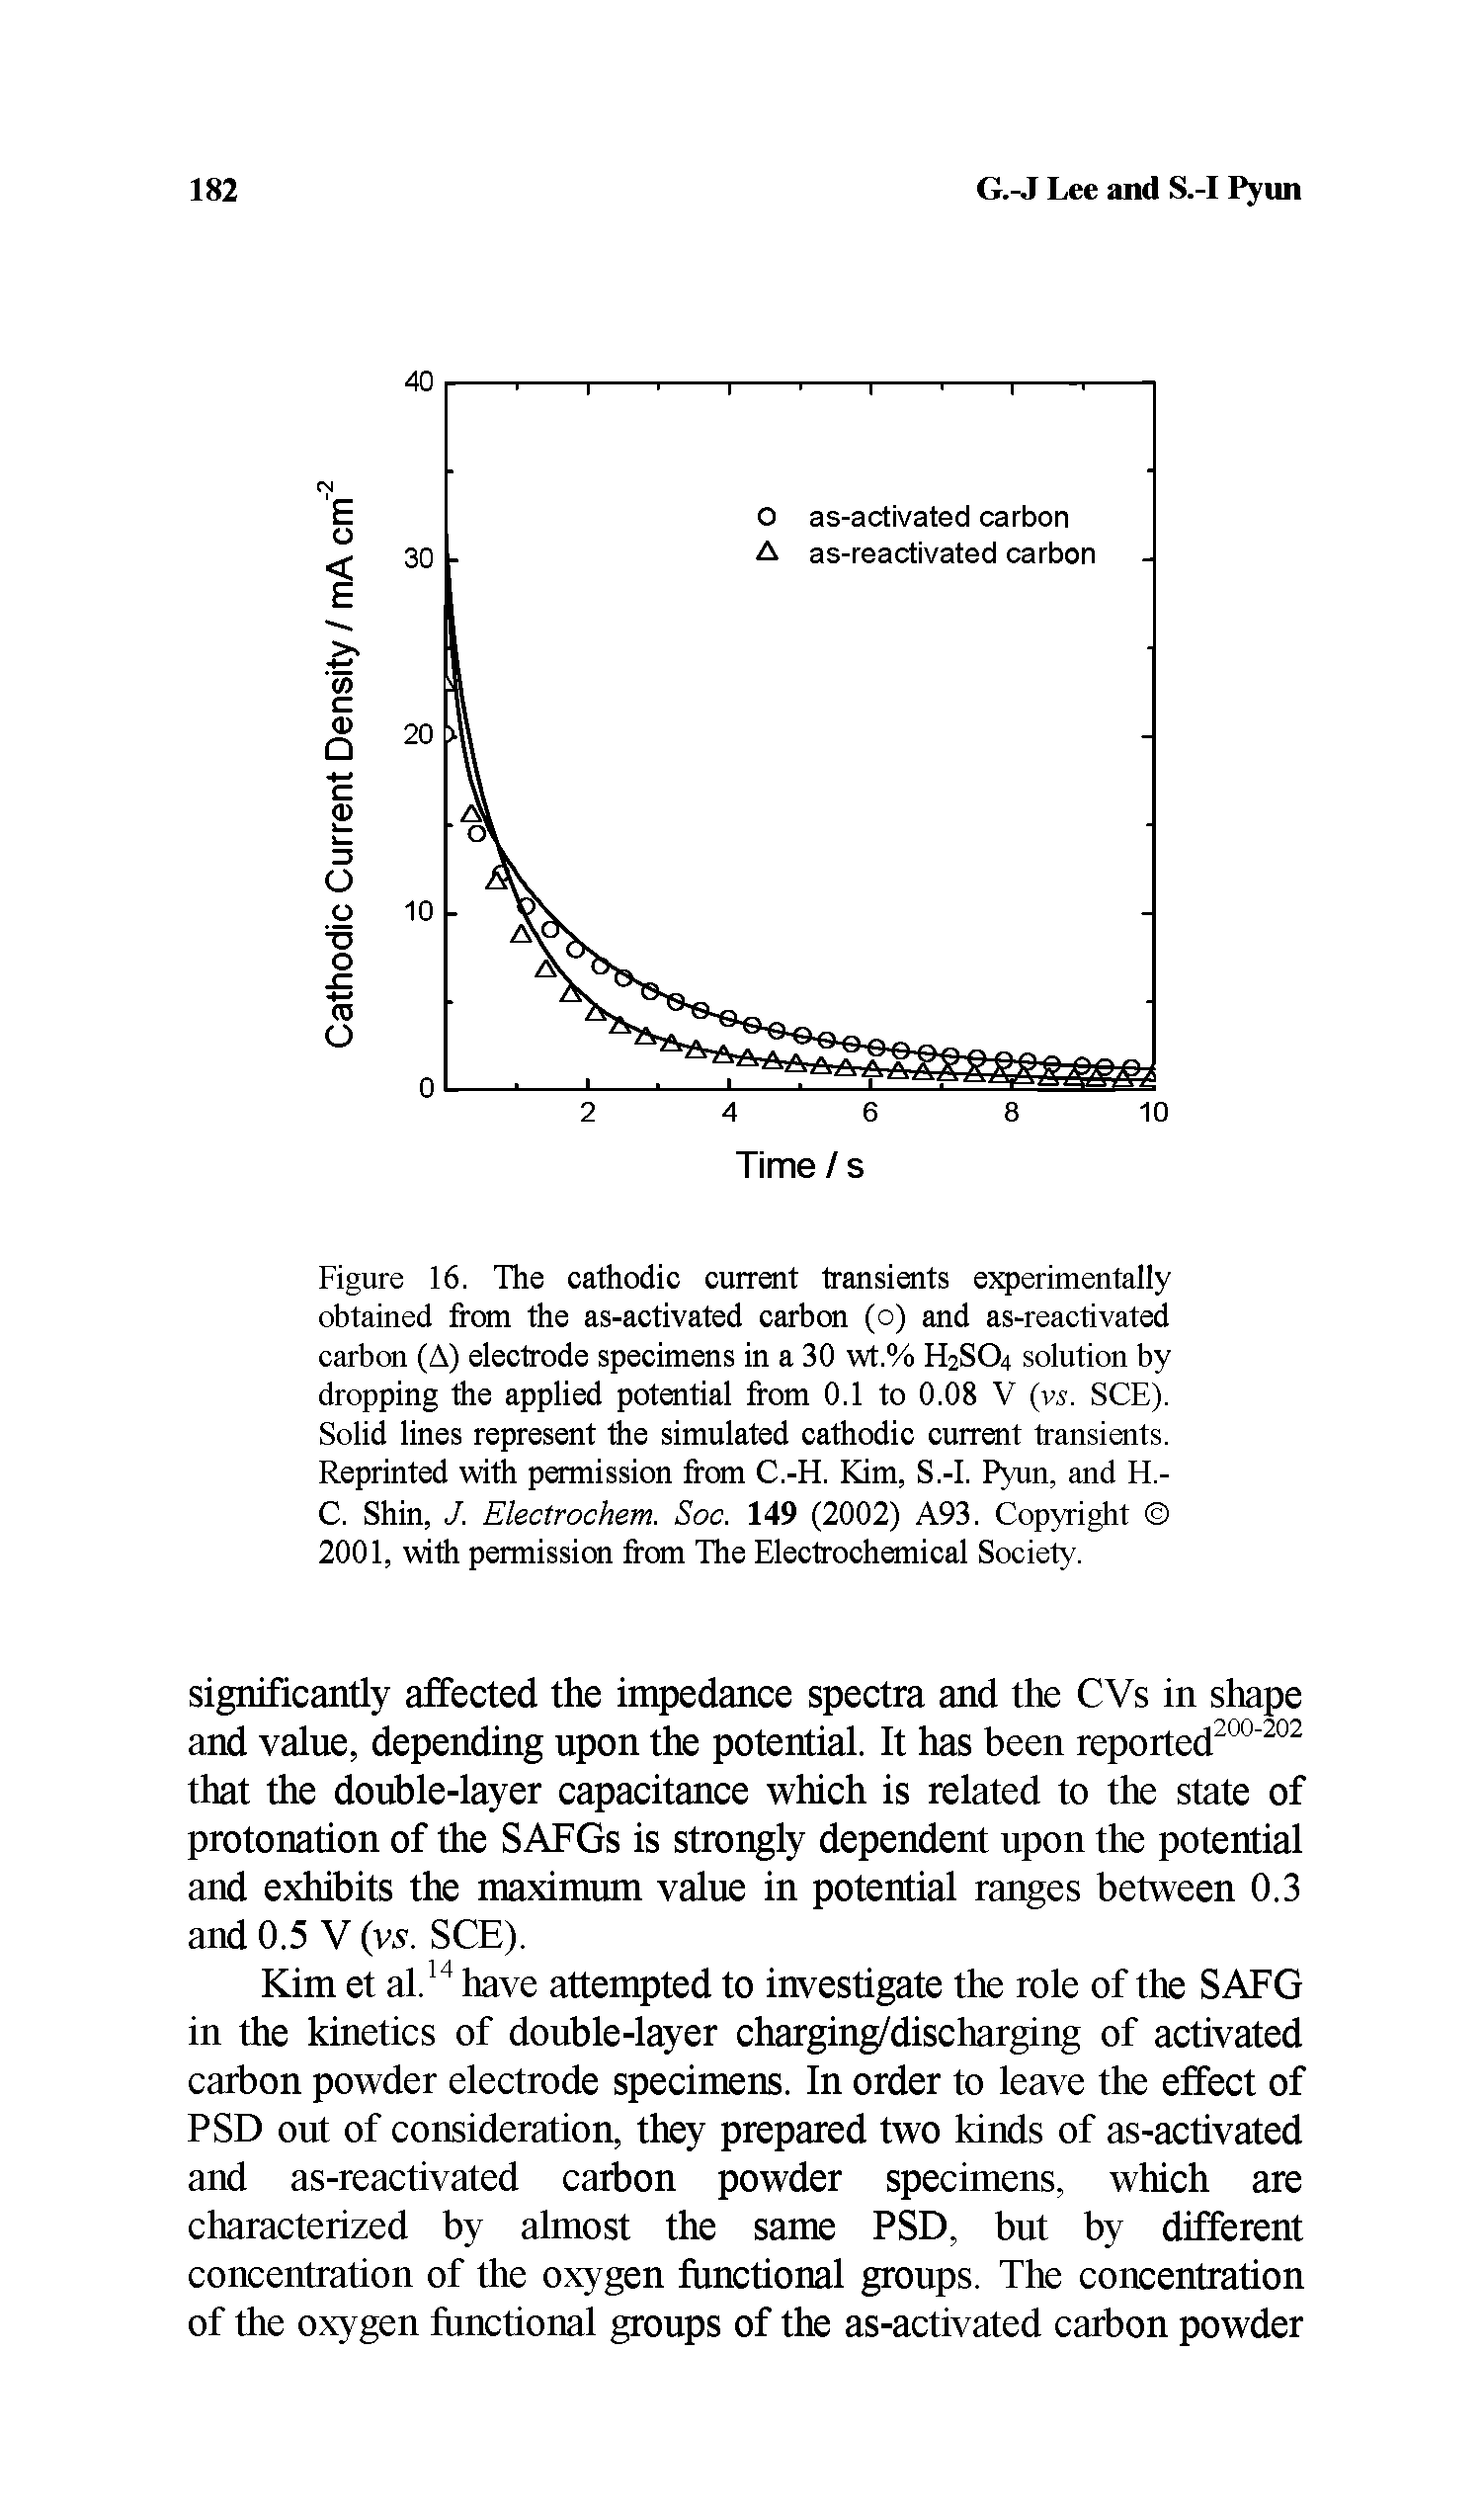 Figure 16. The cathodic current transients experimentally obtained from the as-activated carbon (o) and as-reactivated carbon (A) electrode specimens in a 30 wt.% H2SO4 solution by dropping the applied potential from 0.1 to 0.08 V (vs. SCE). Solid lines represent the simulated cathodic current transients. Reprinted with permission from C.-H. Kim, S.-I. Pyun, and H.-C. Shin, J. Electrochem. Soc. 149 (2002) A93. Copyright 2001, with permission from The Electrochemical Society.